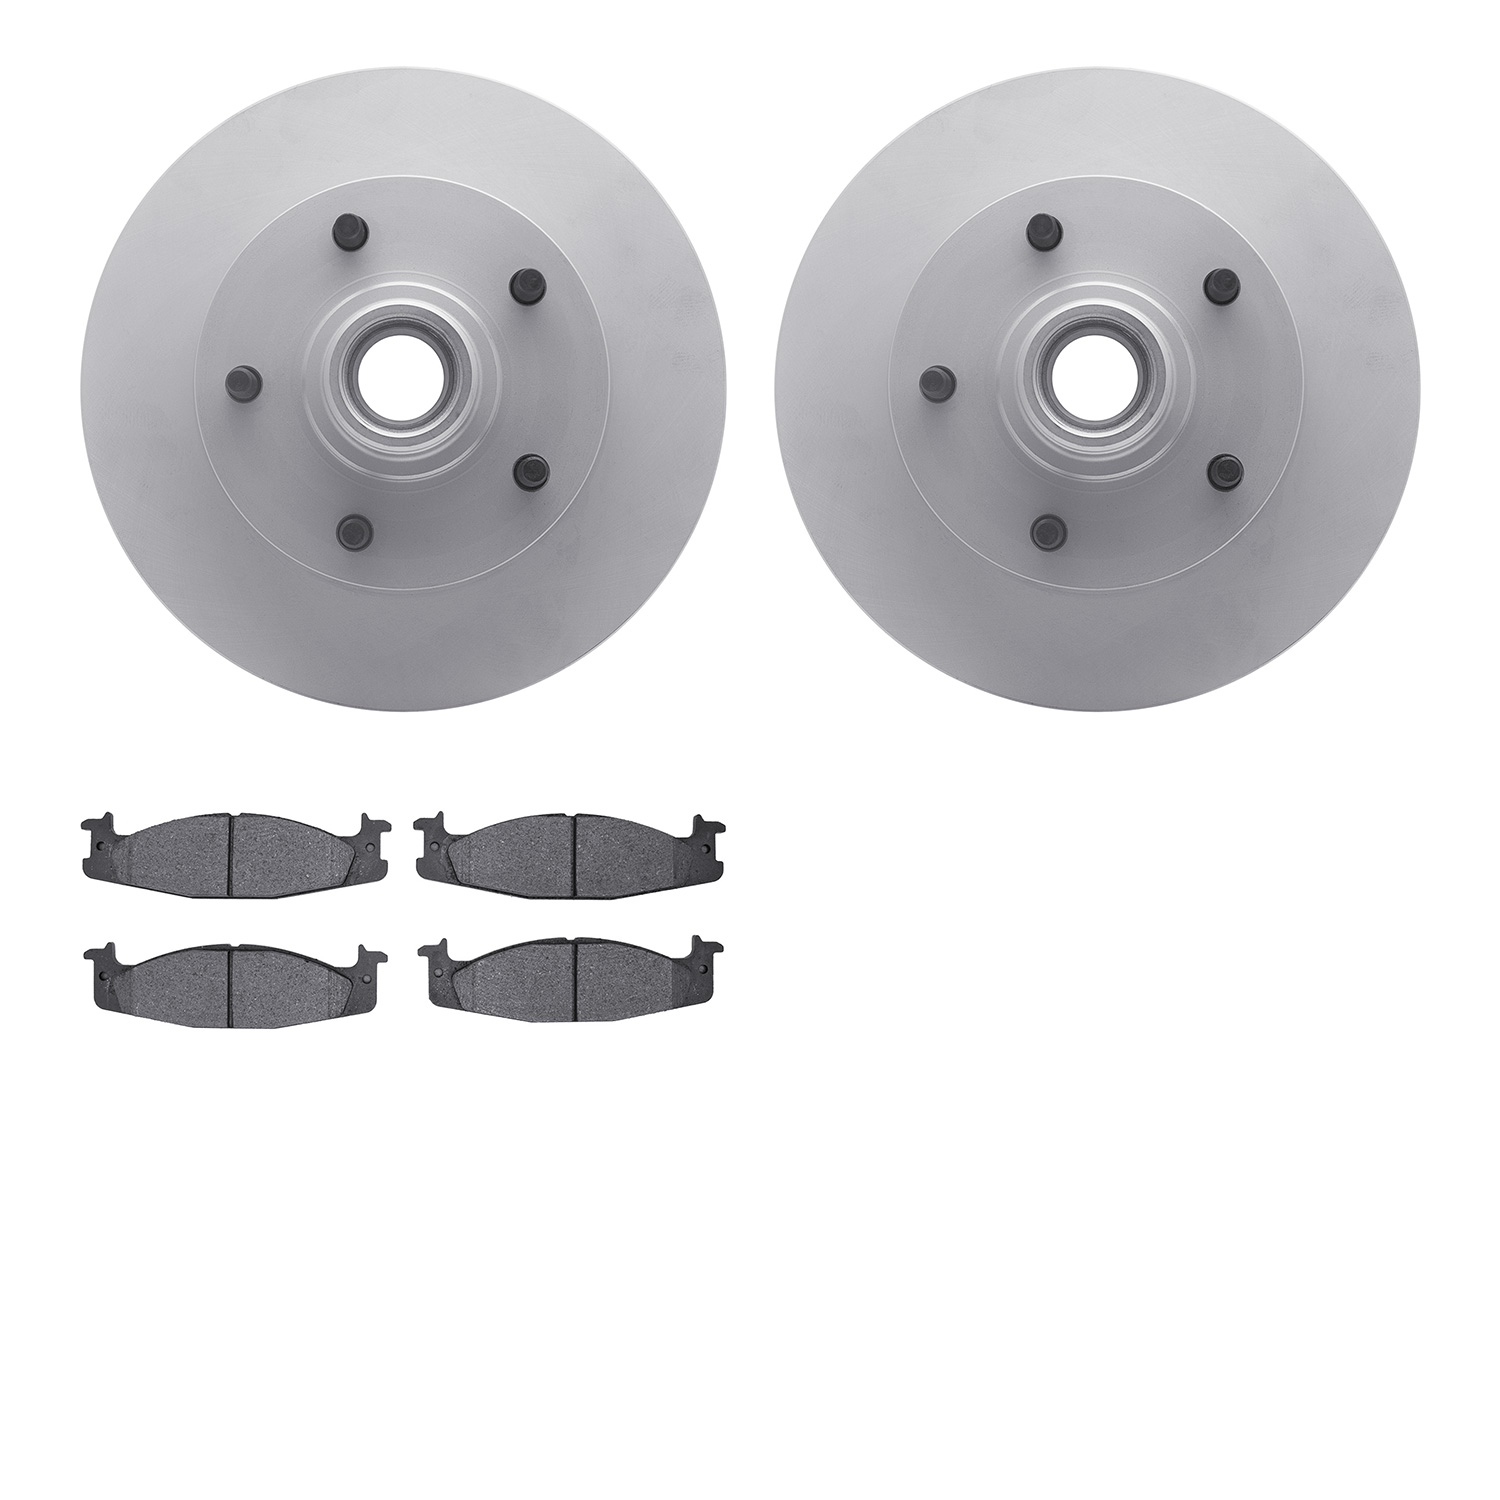 4402-54009 Geospec Brake Rotors with Ultimate-Duty Brake Pads Kit, 1994-2003 Ford/Lincoln/Mercury/Mazda, Position: Front